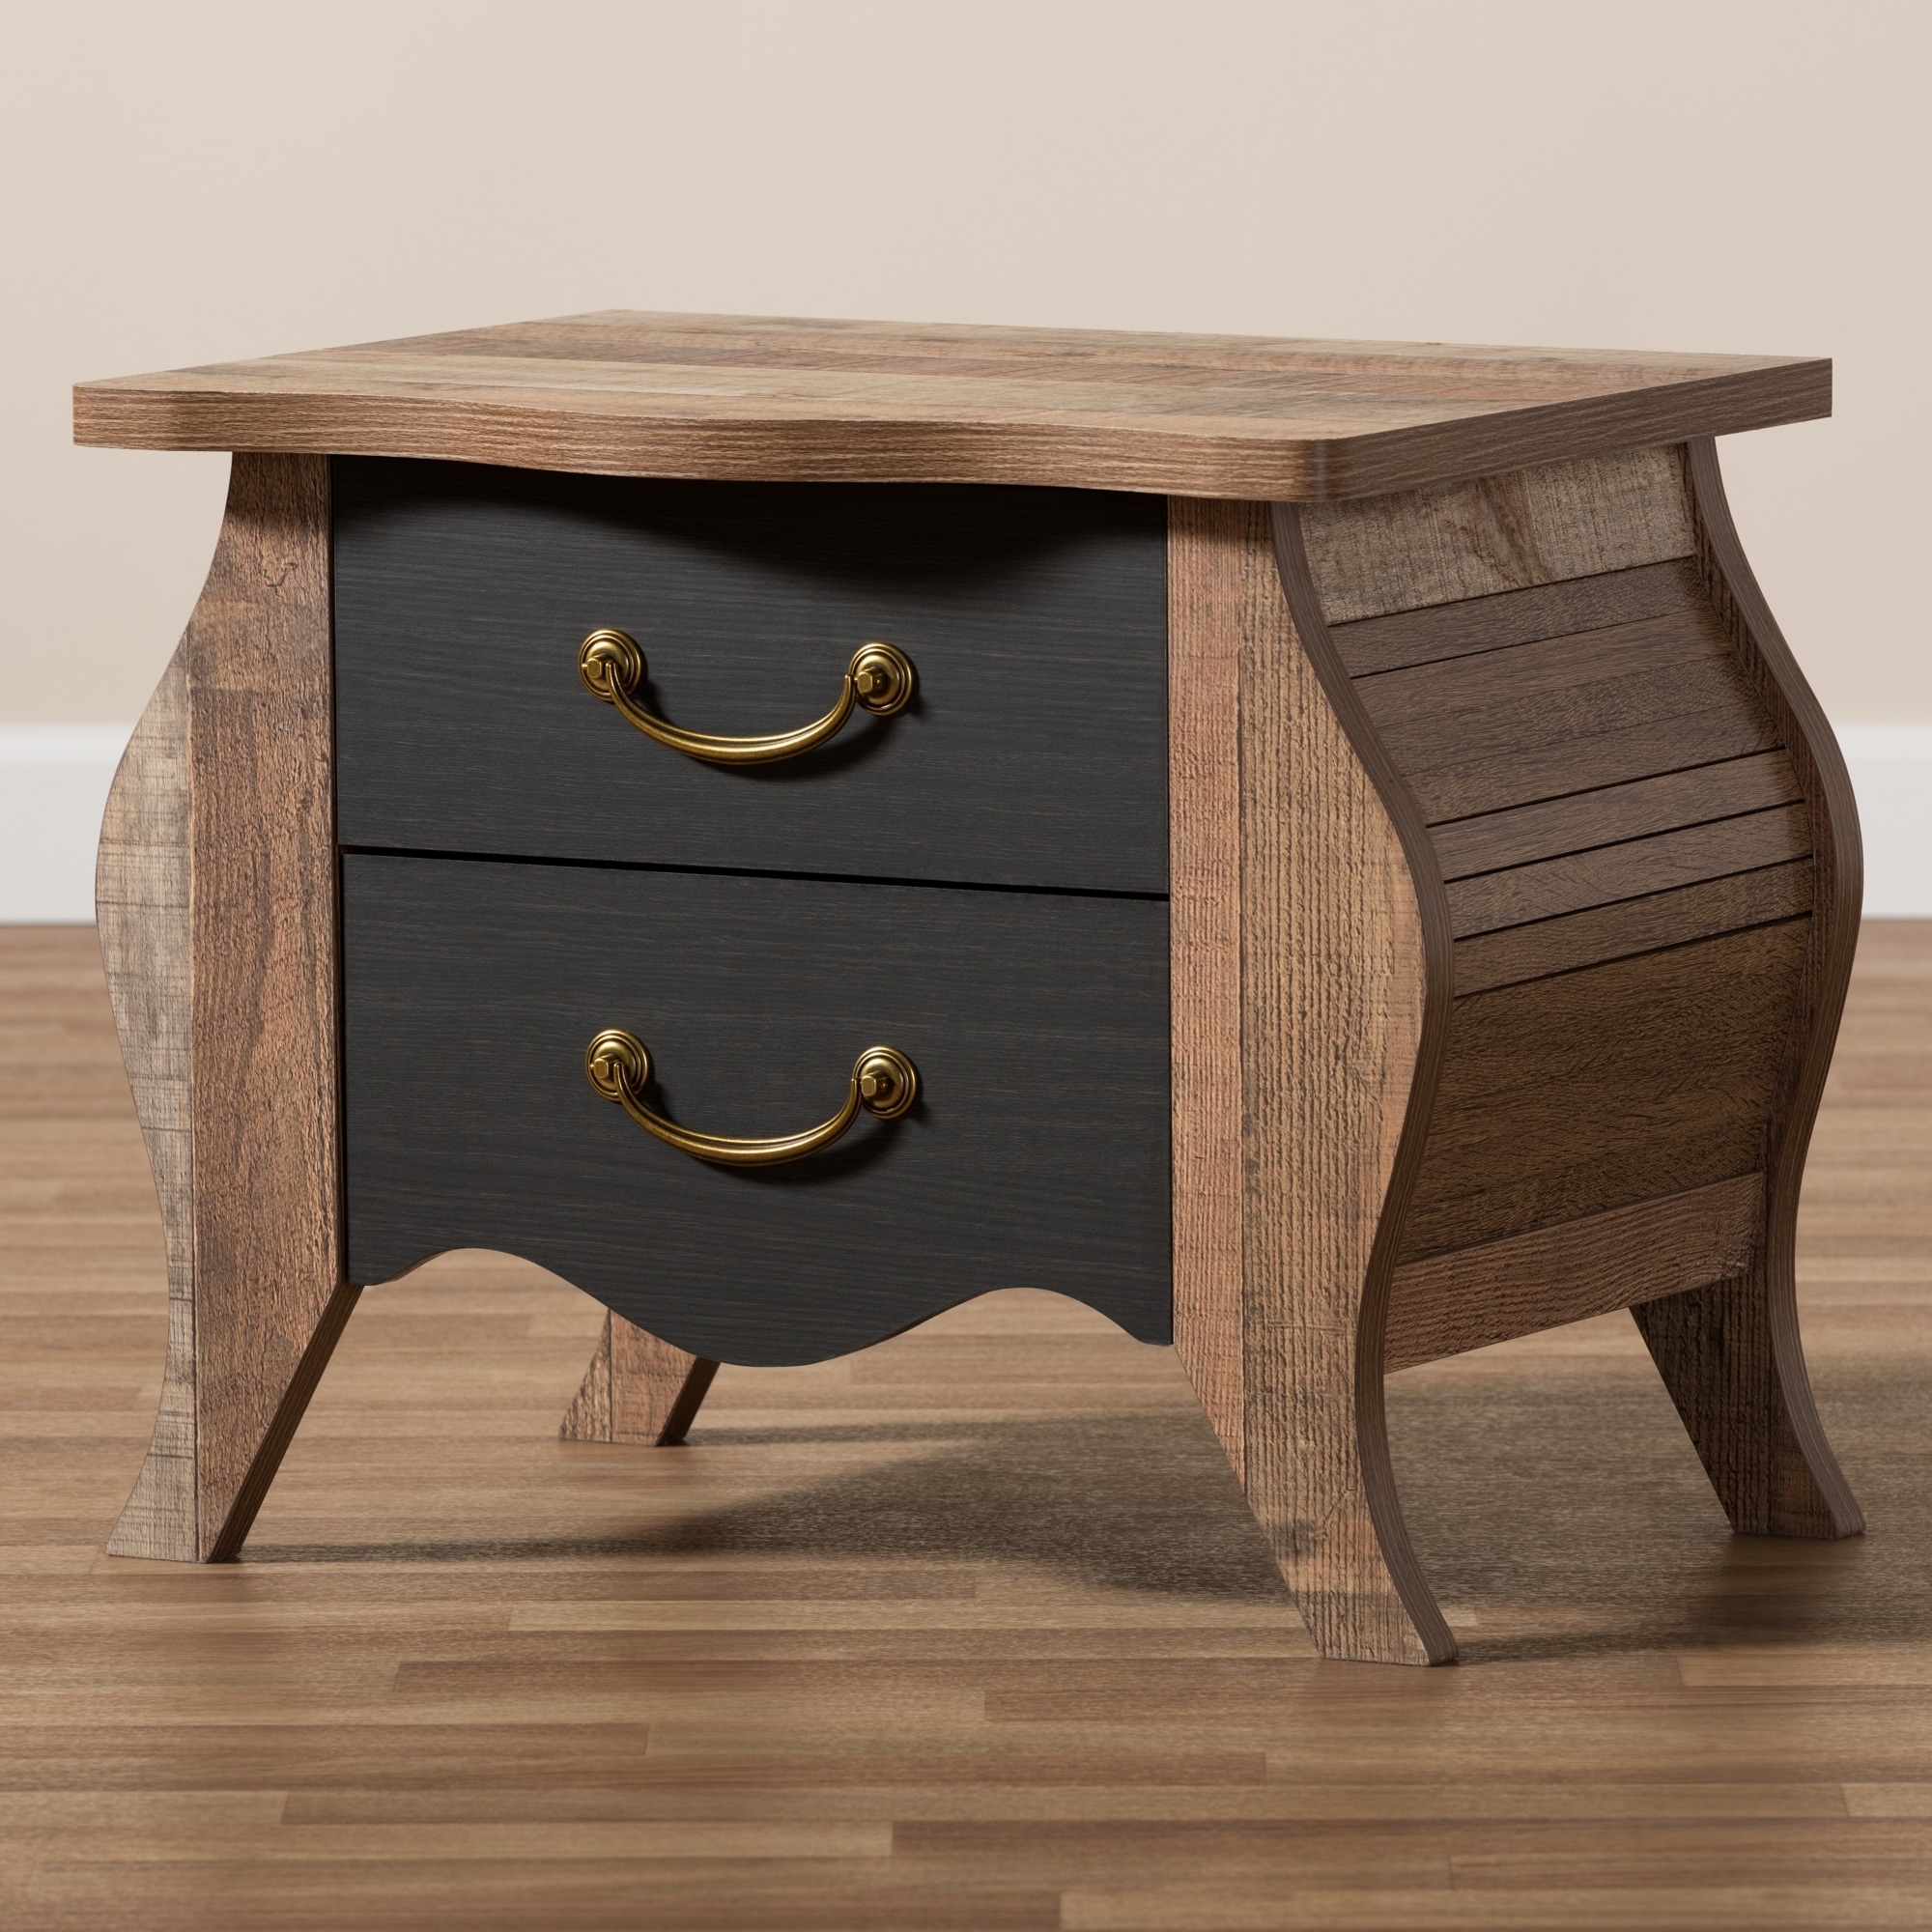 the terrific favorite modern country nightstands idea hotxpress cottage black and oak drawer nightstand baxton studio free shipping today home goods website hammary furniture